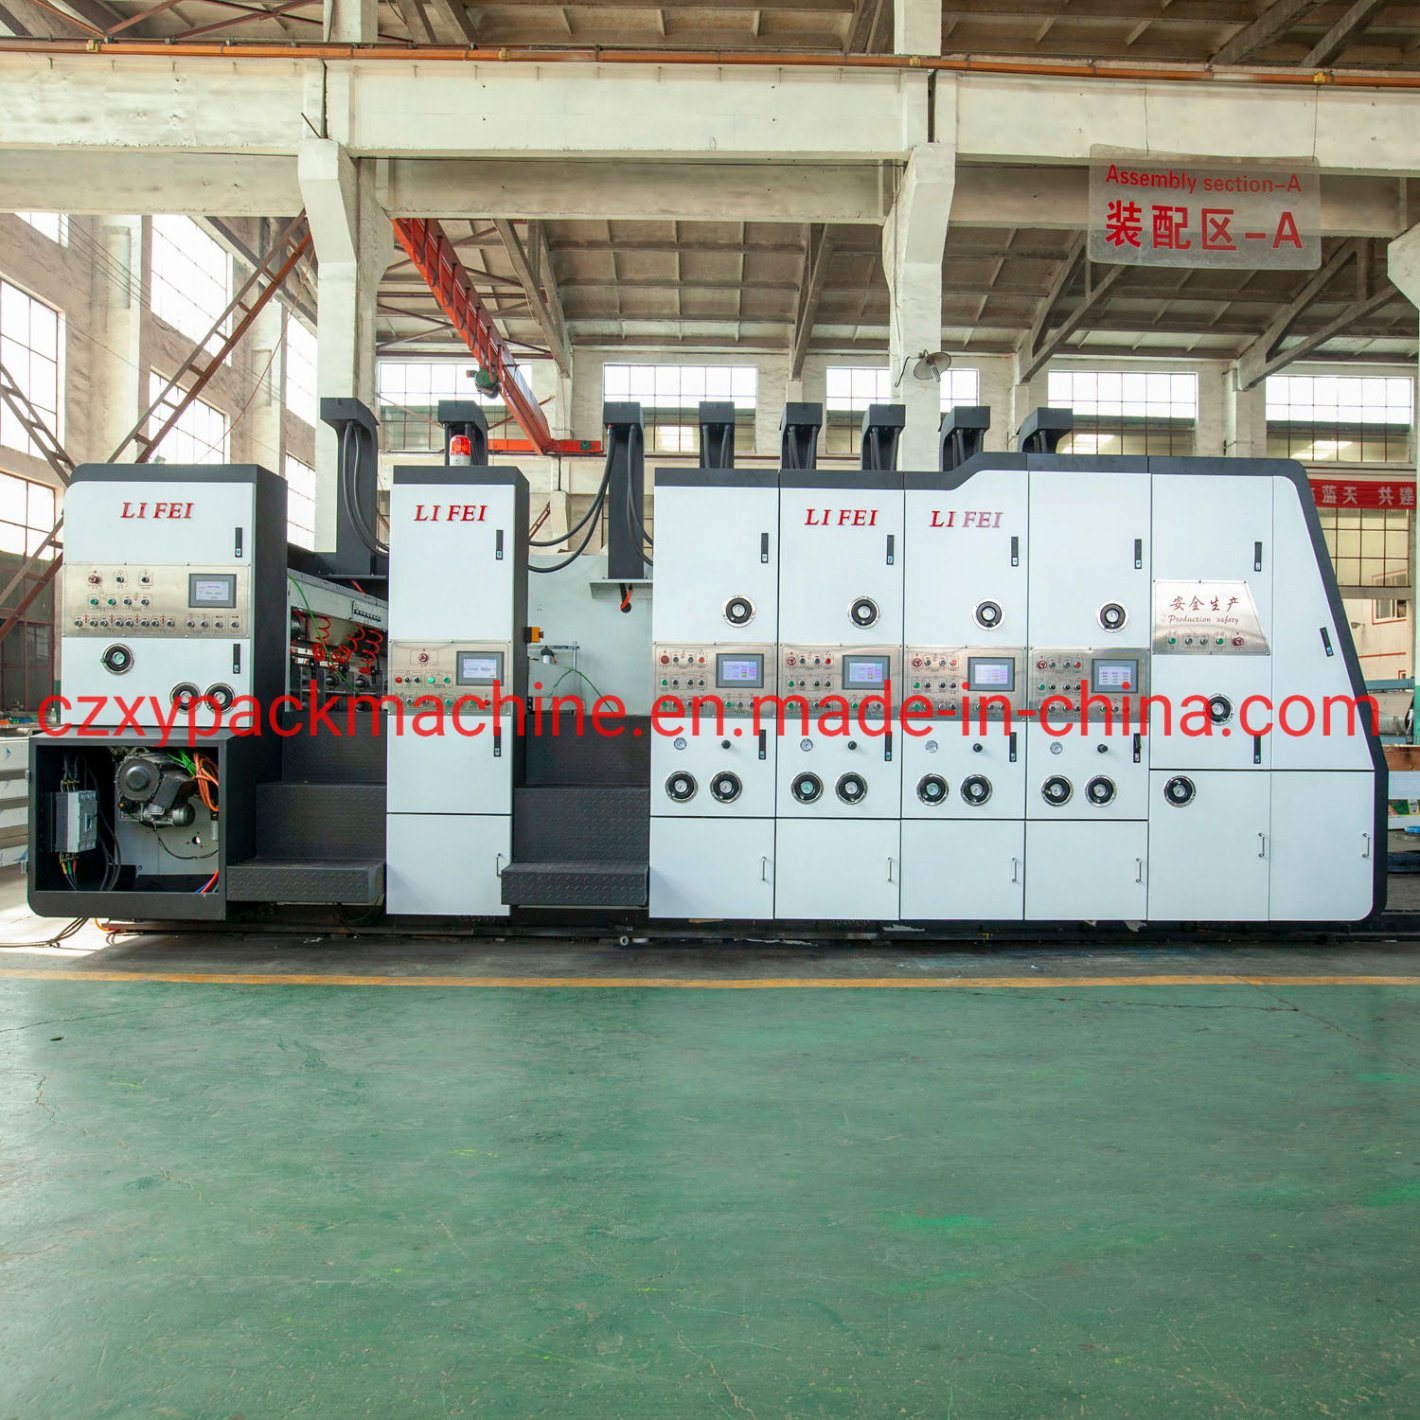 Hot Sale for Color Box Printing Machine